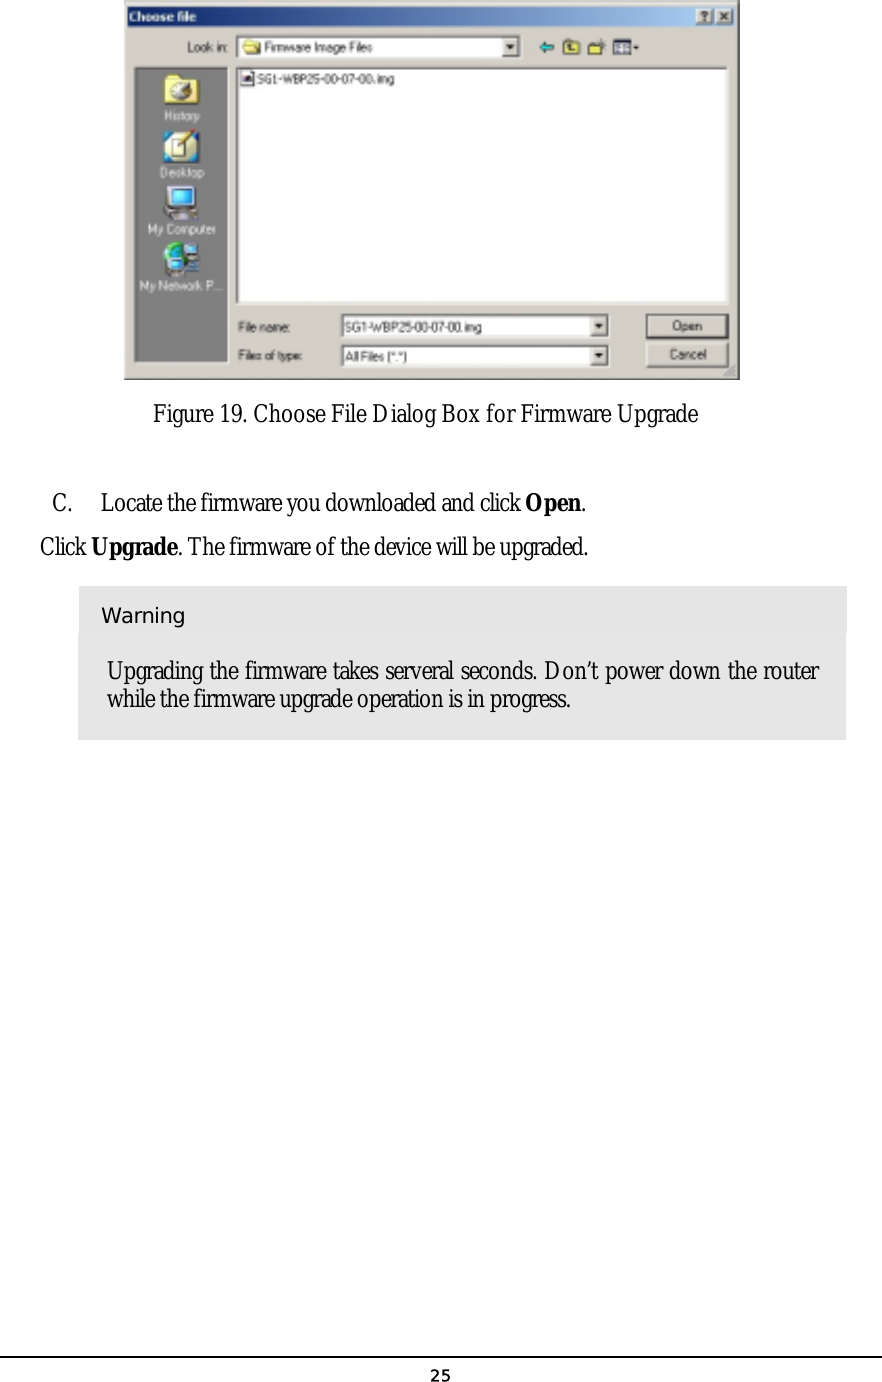   25   C.  Locate the firmware you downloaded and click Open. Click Upgrade. The firmware of the device will be upgraded. Warning Upgrading the firmware takes serveral seconds. Don’t power down the router while the firmware upgrade operation is in progress.            Figure 19. Choose File Dialog Box for Firmware Upgrade 